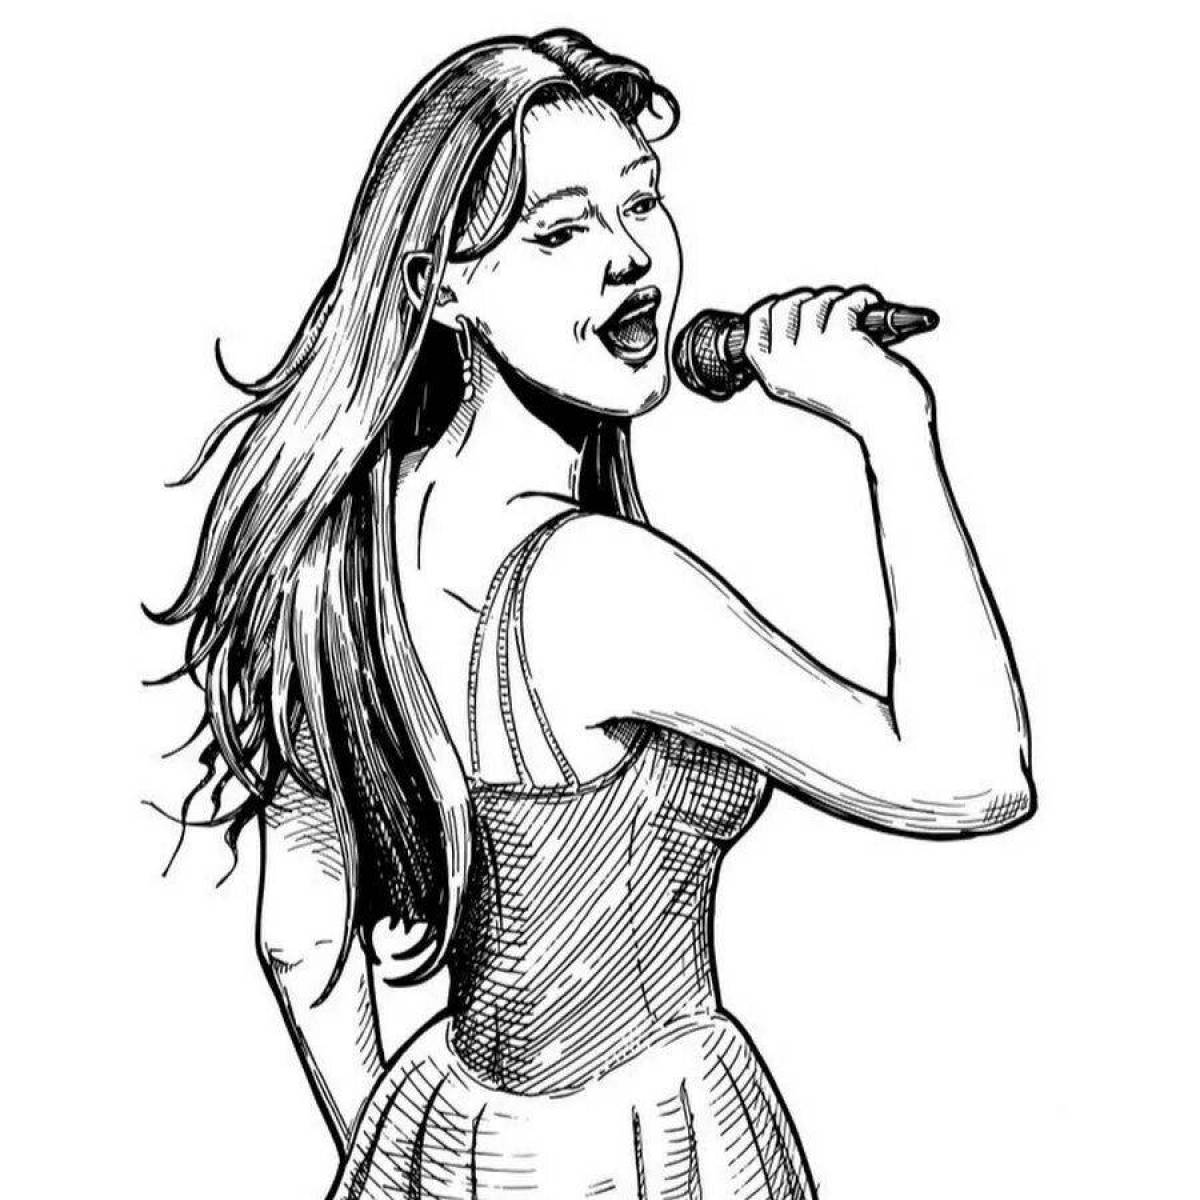 Coloring page playful singer for kids